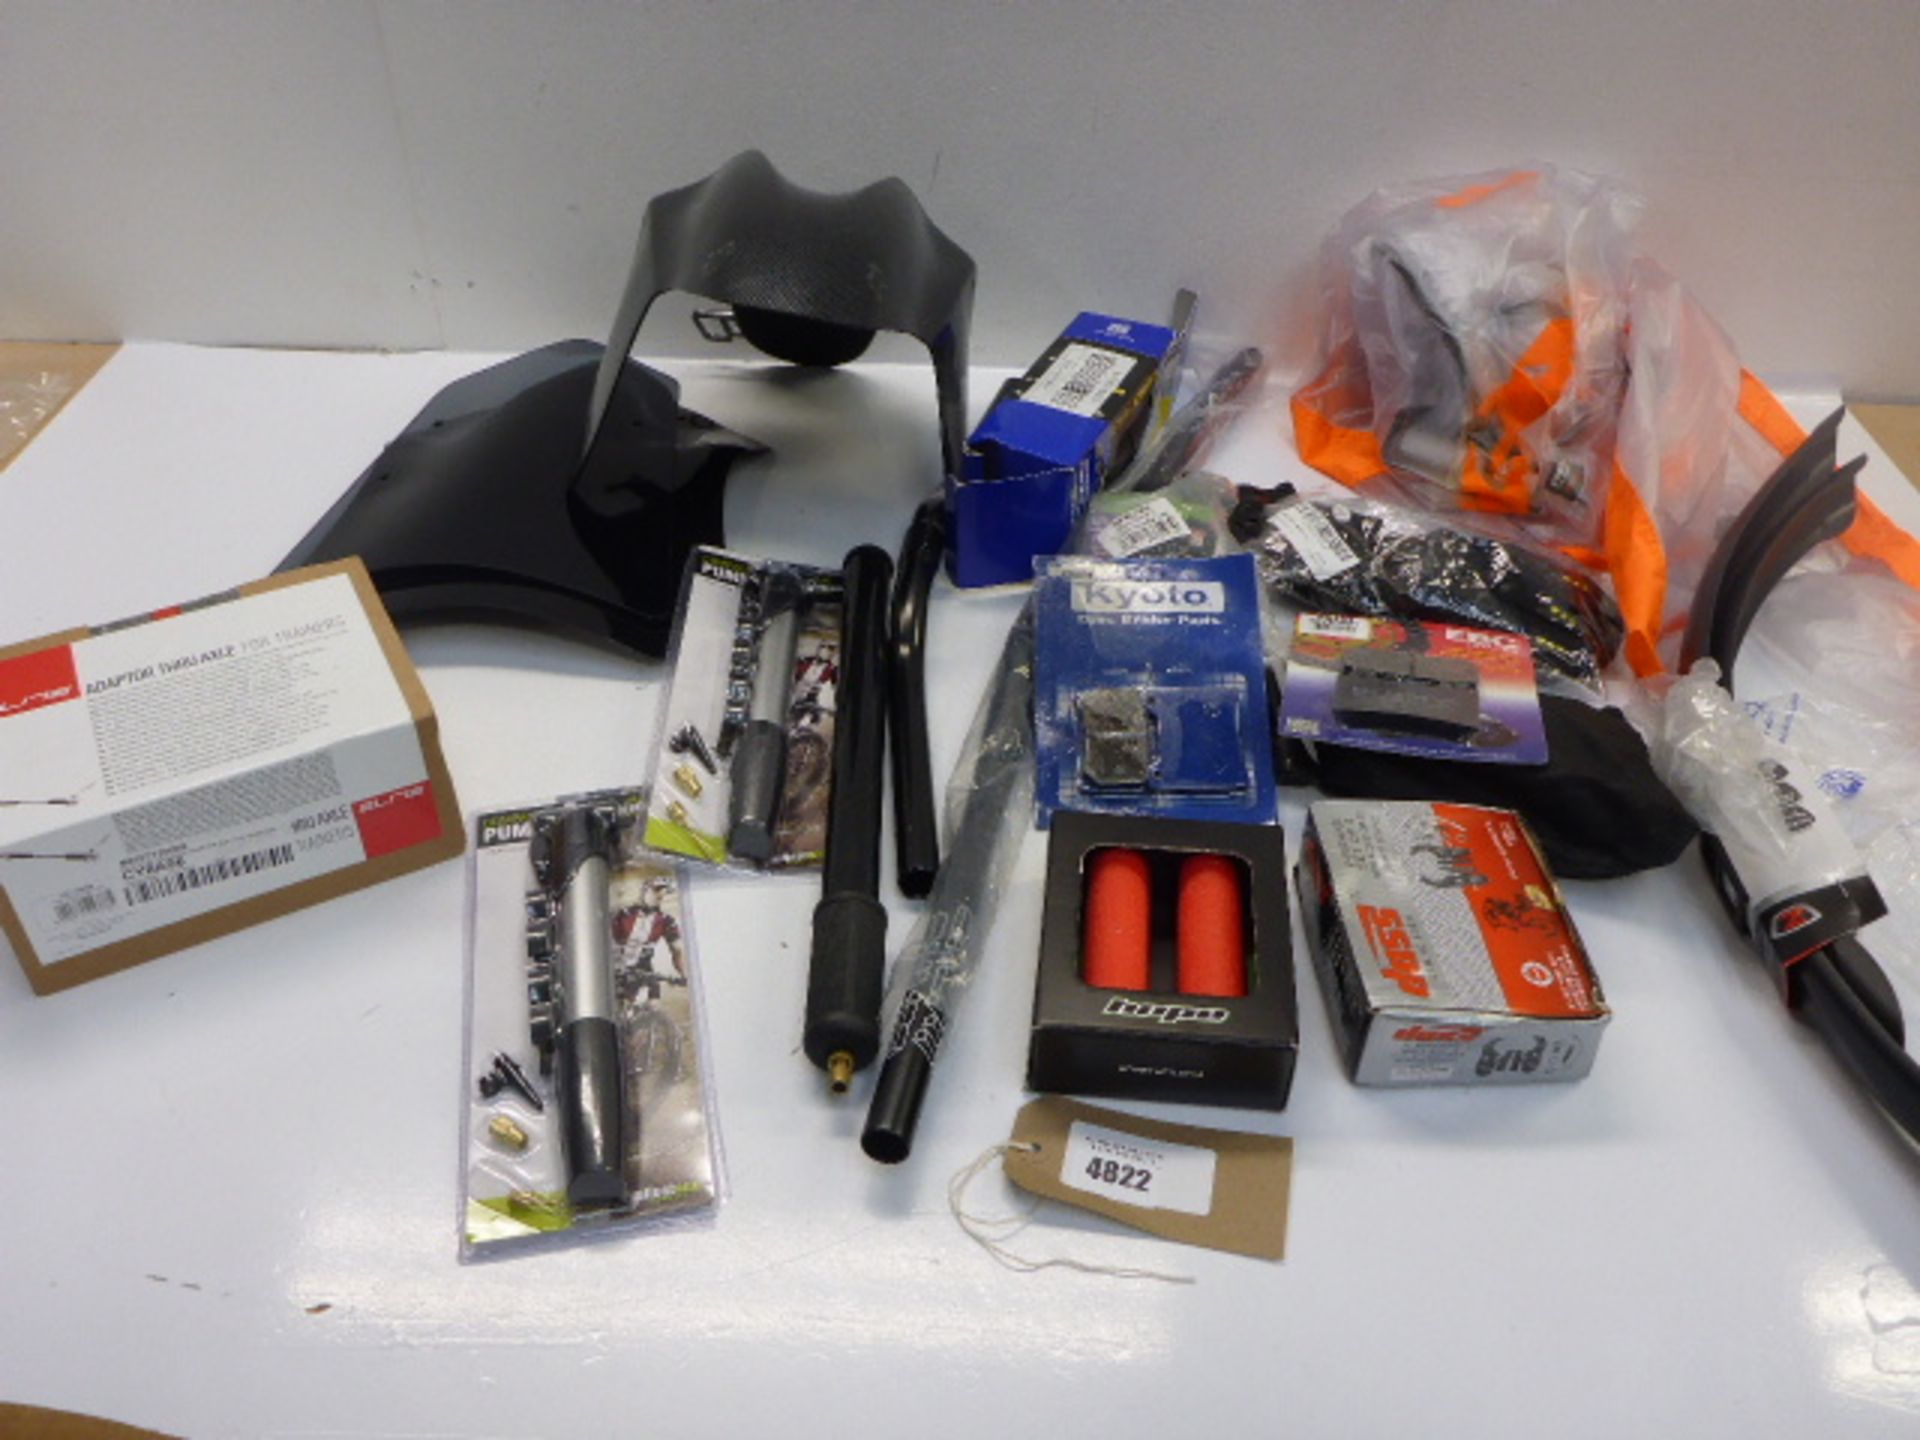 Bike and motorbike parts including grips, mud guards, mouldings, brake pads, pumps etc